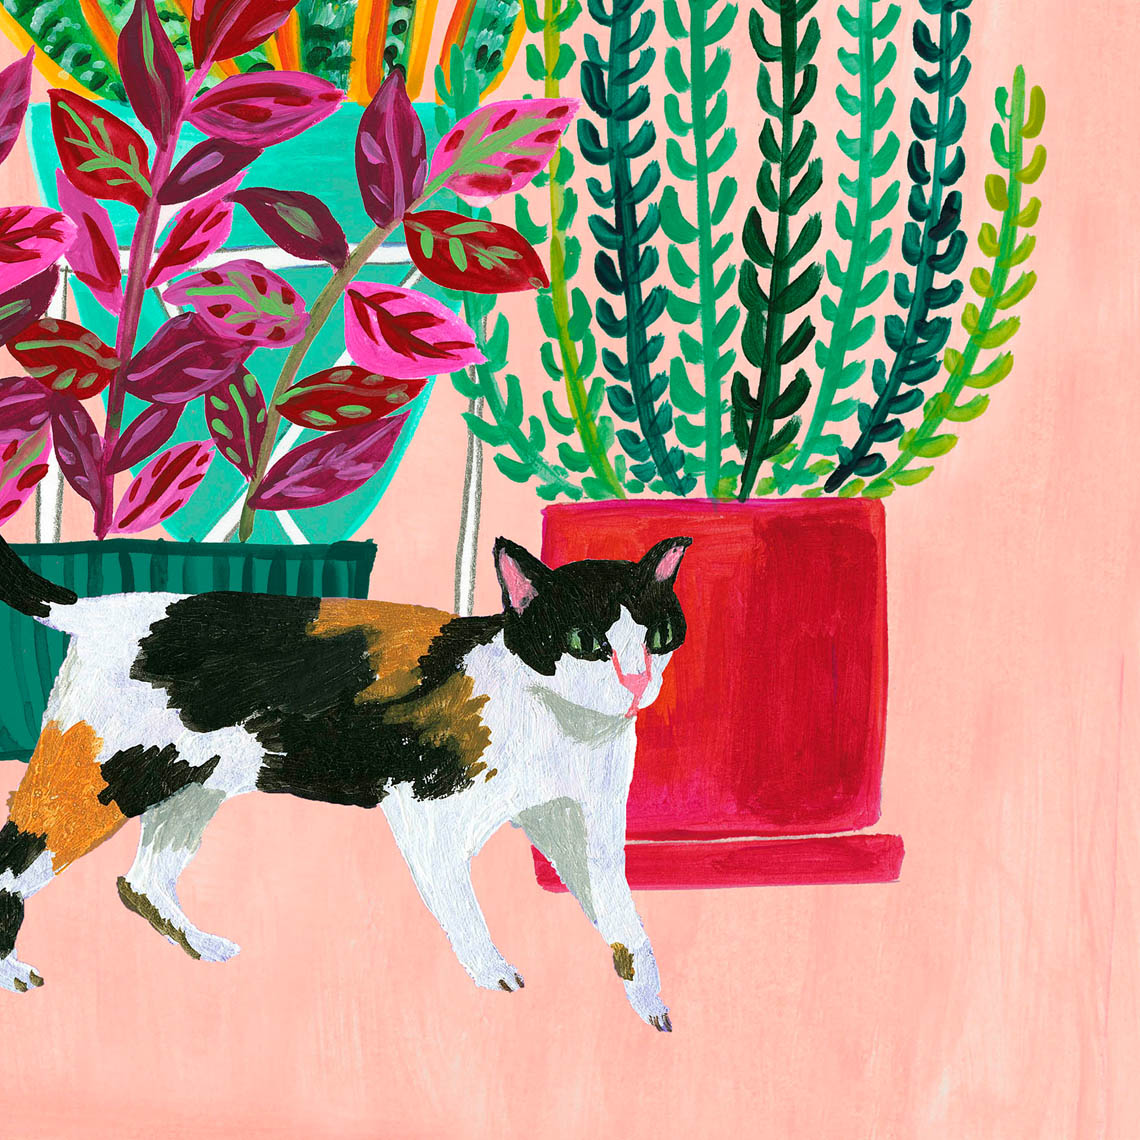 Detail of calico cat and houseplant illustration